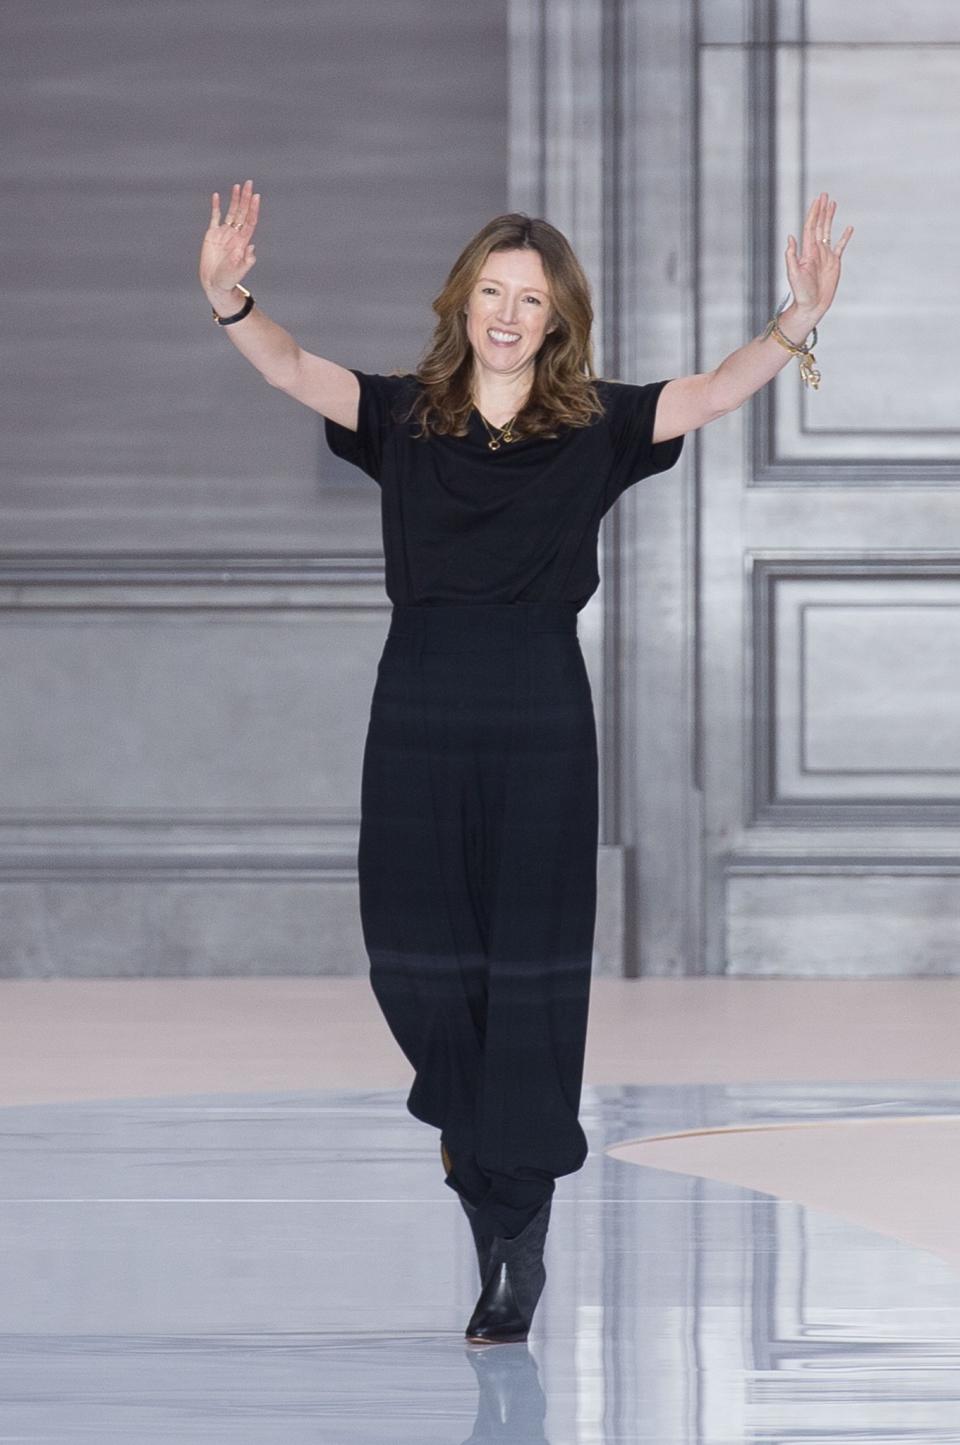 Clare’s final farewell at the end of the Chloé Fall/Winter 2017 show